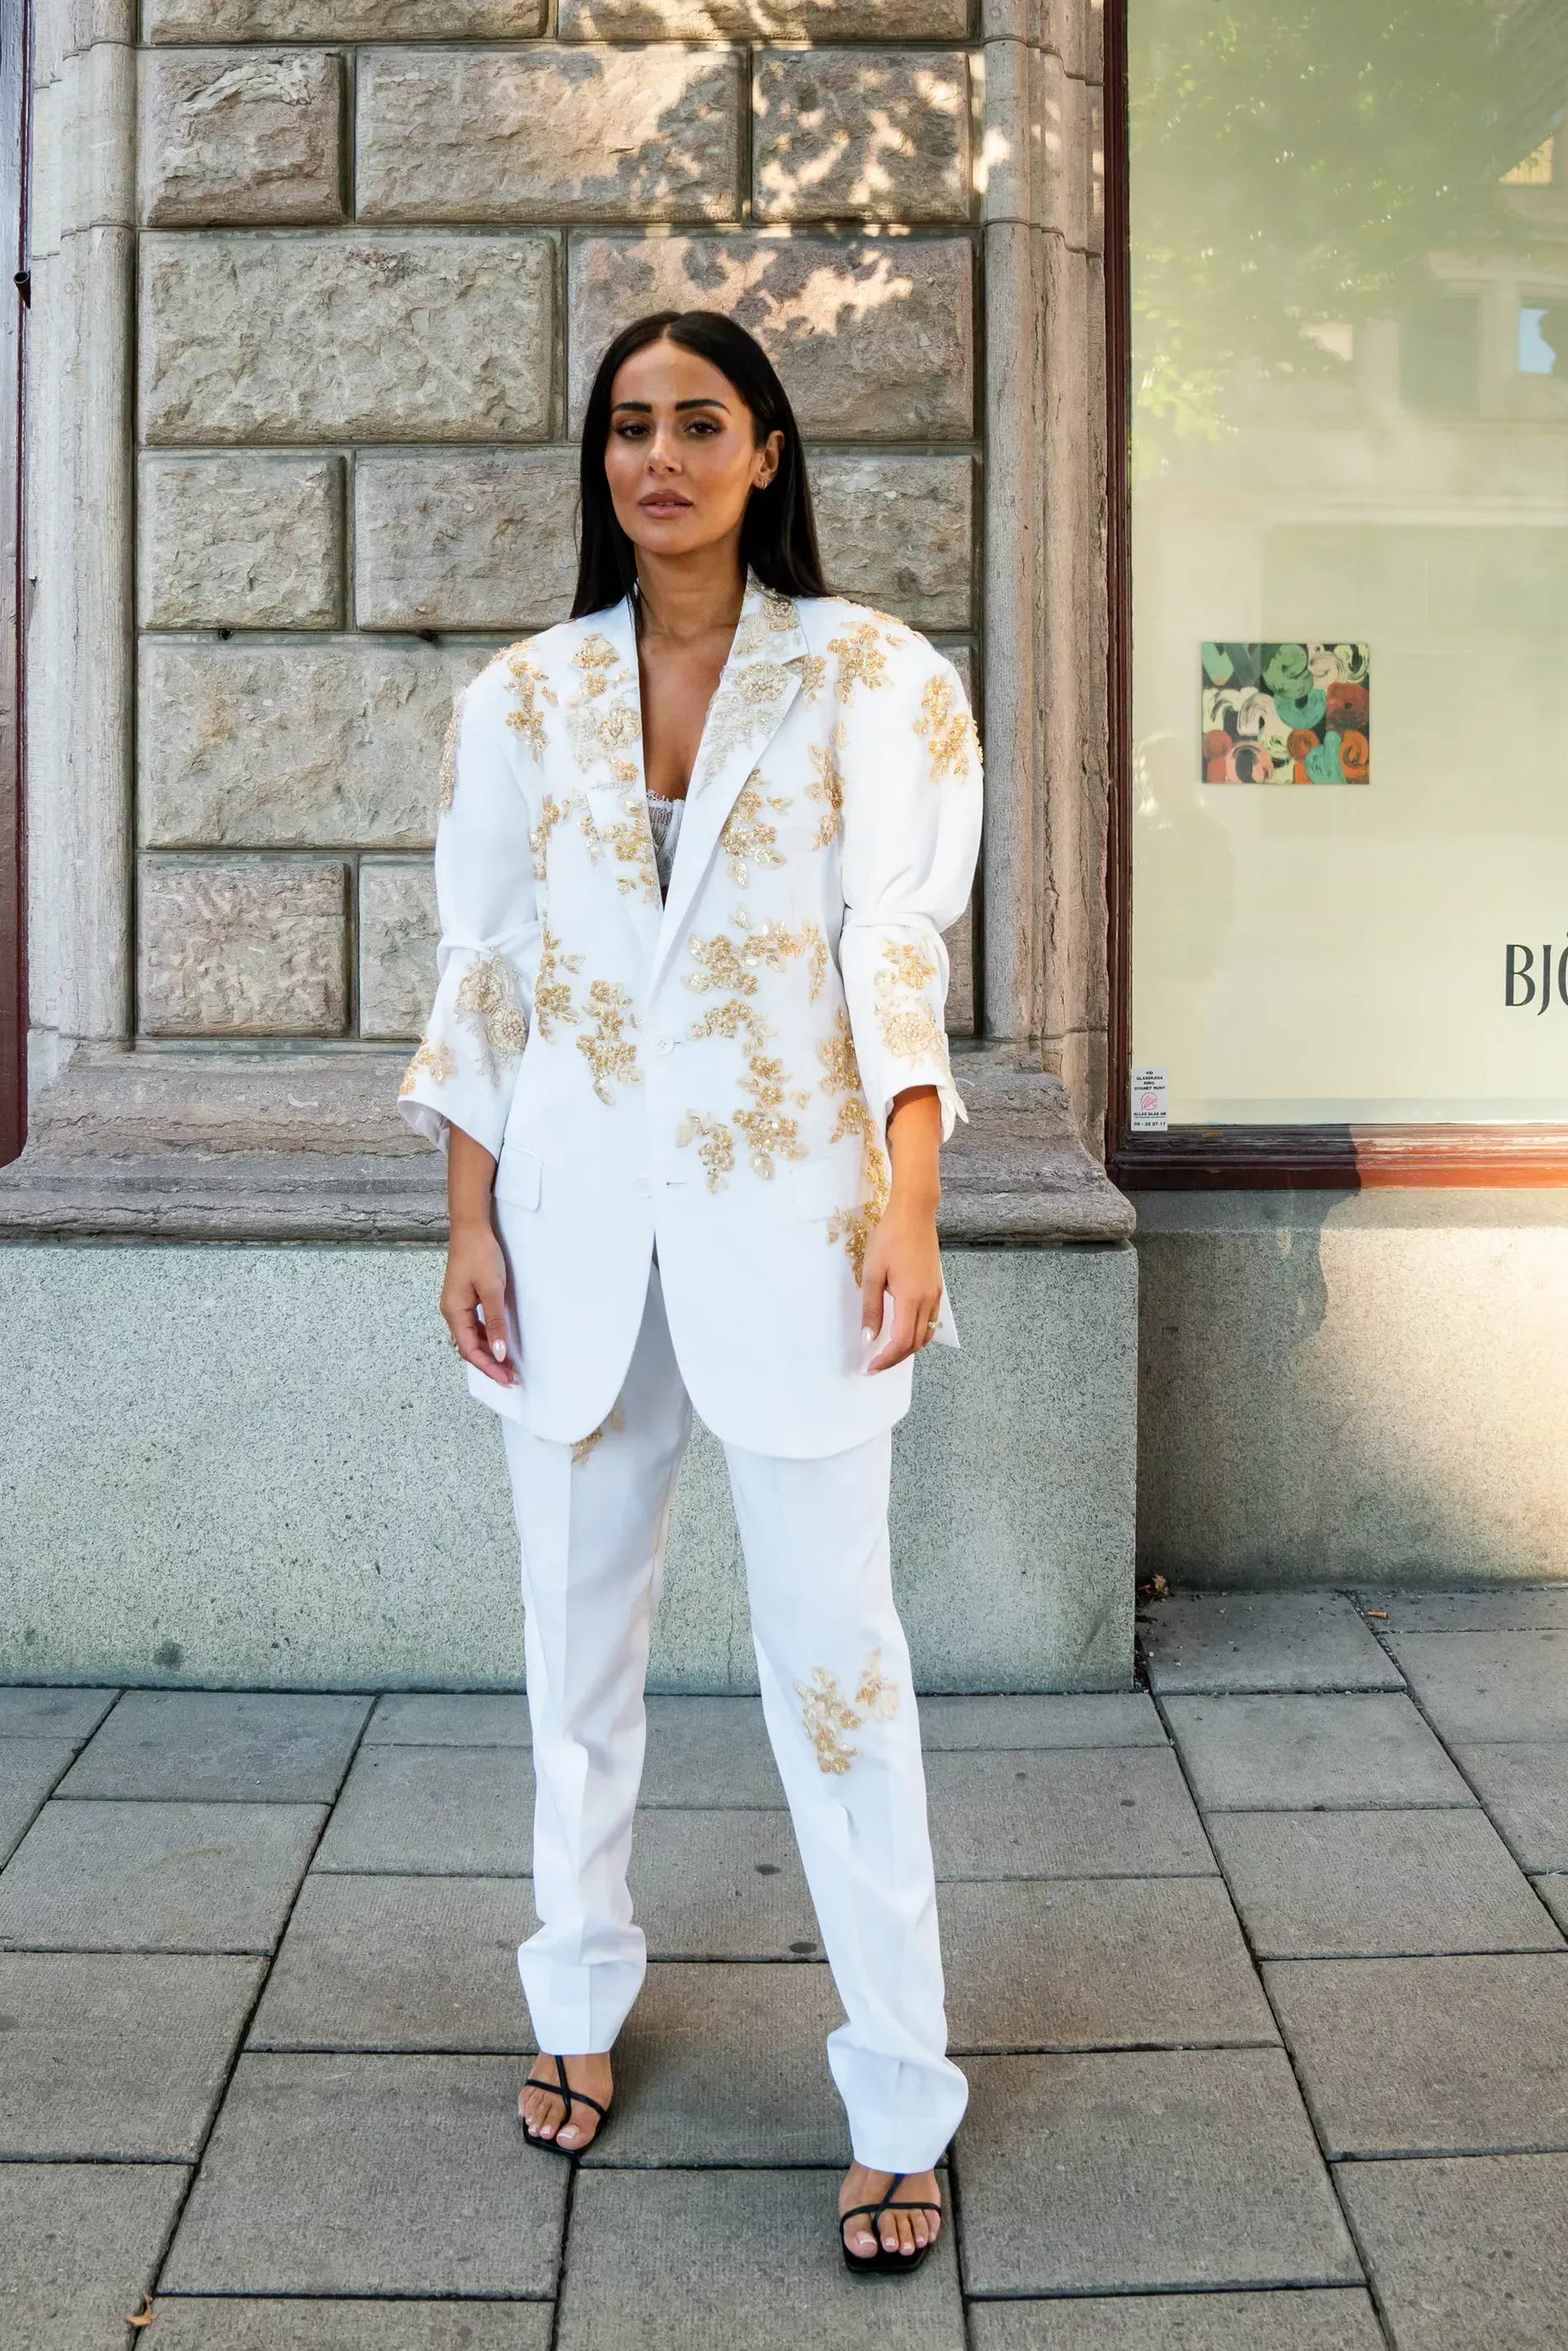 Stockholm fashion week guest wears white suit with golden elements